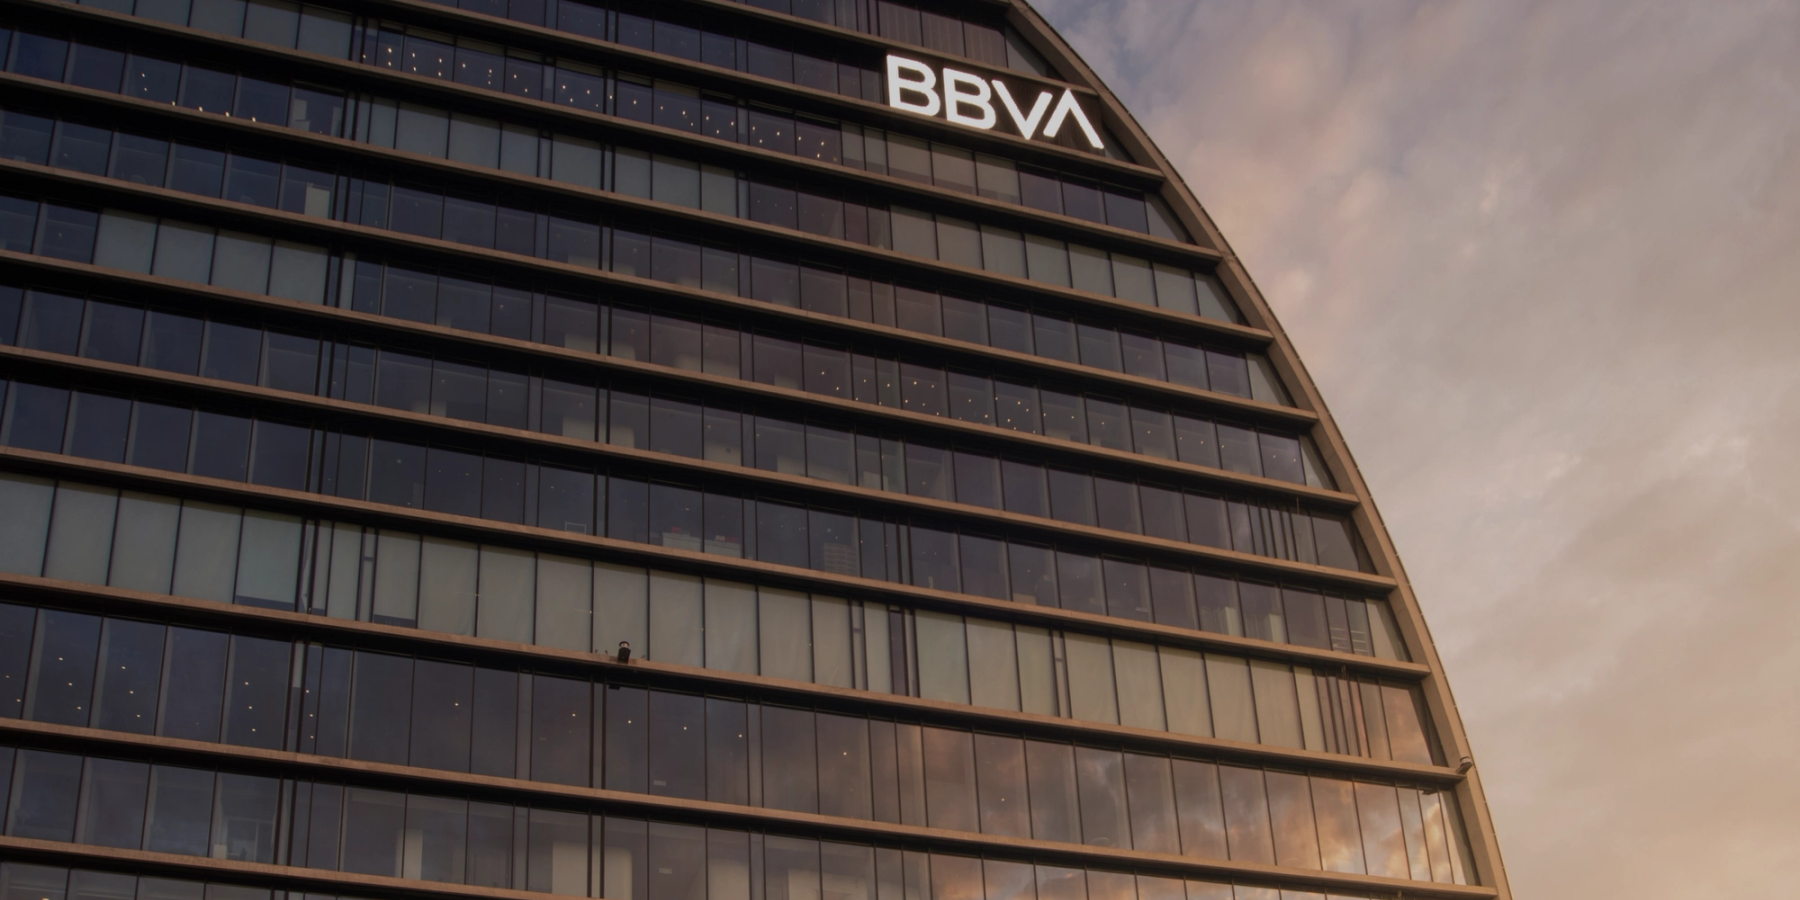 BBVA implements innovative learning strategies for employees